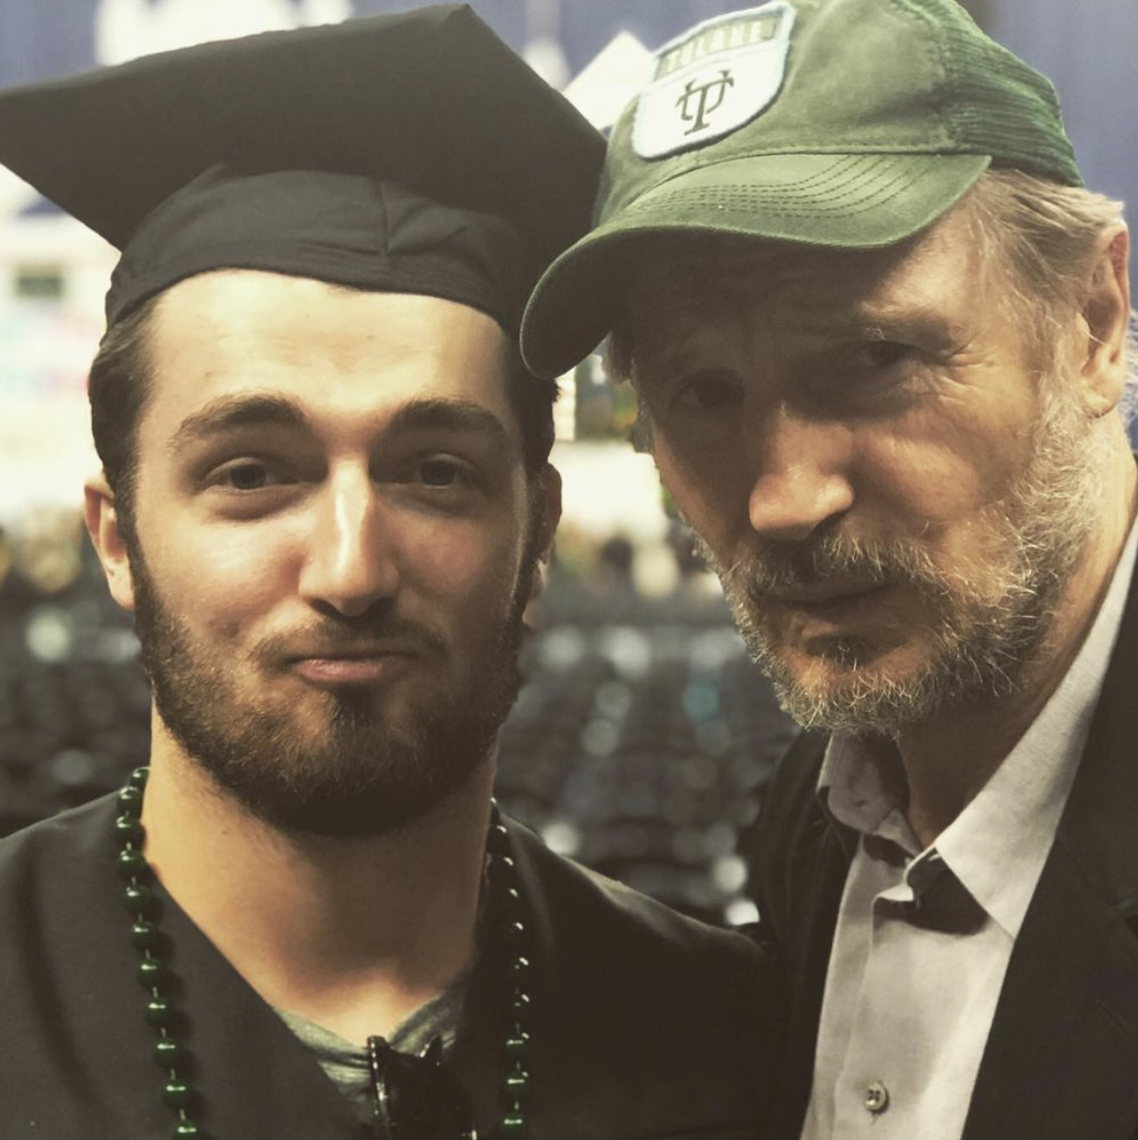 Liam and Daniel Neeson as seen in an Instagram post dated May 24, 2019 | Source: Instagram.com/bgdans91